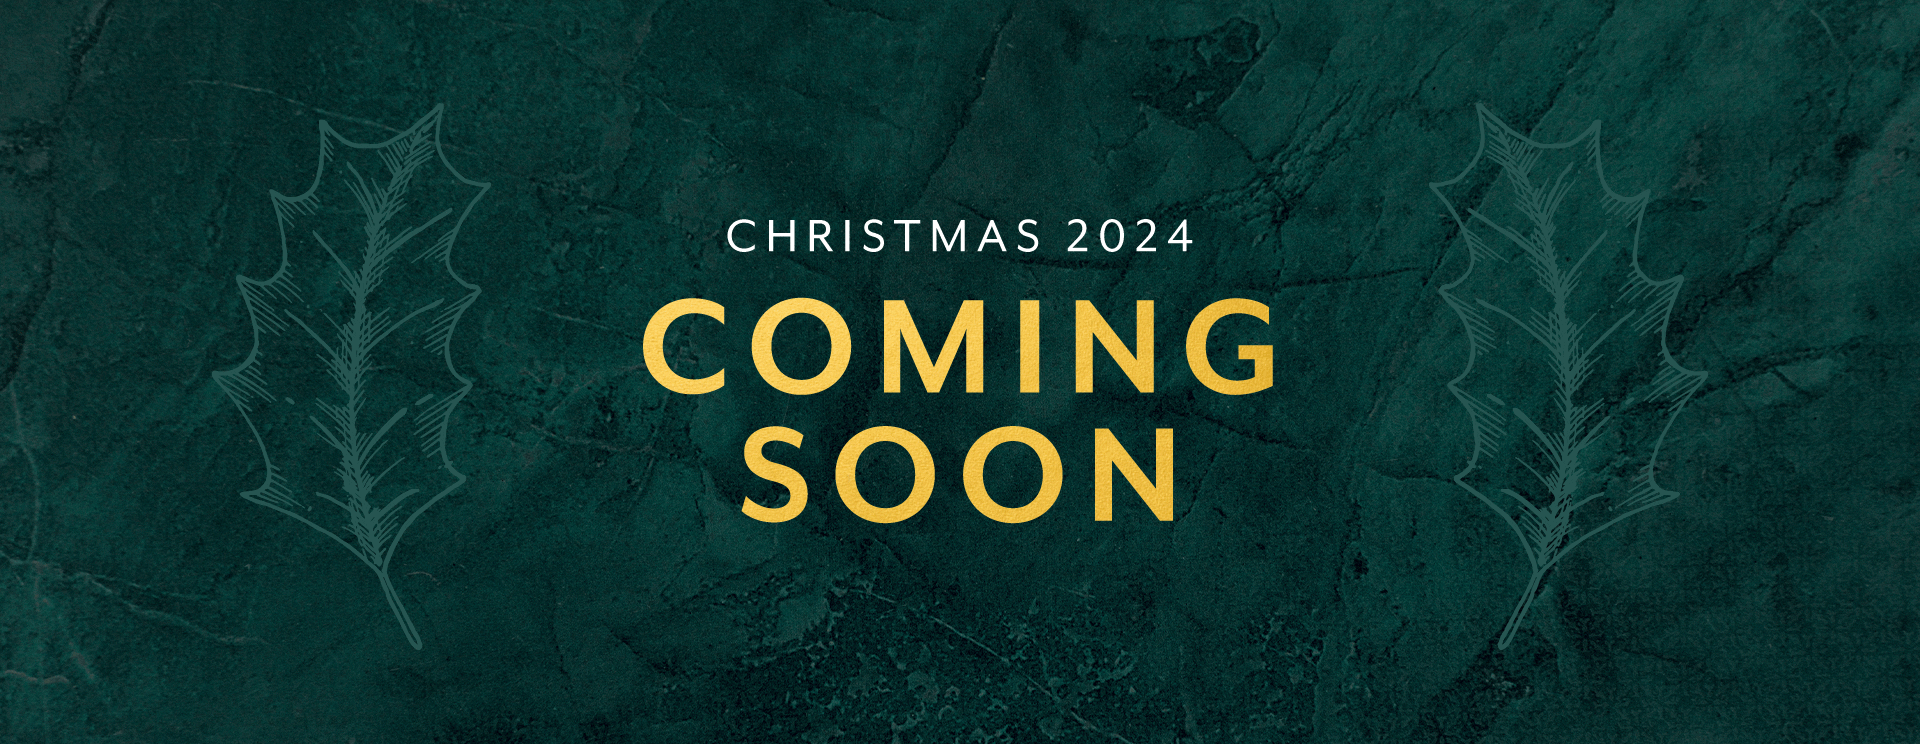 Christmas 2024 at Mountnessing